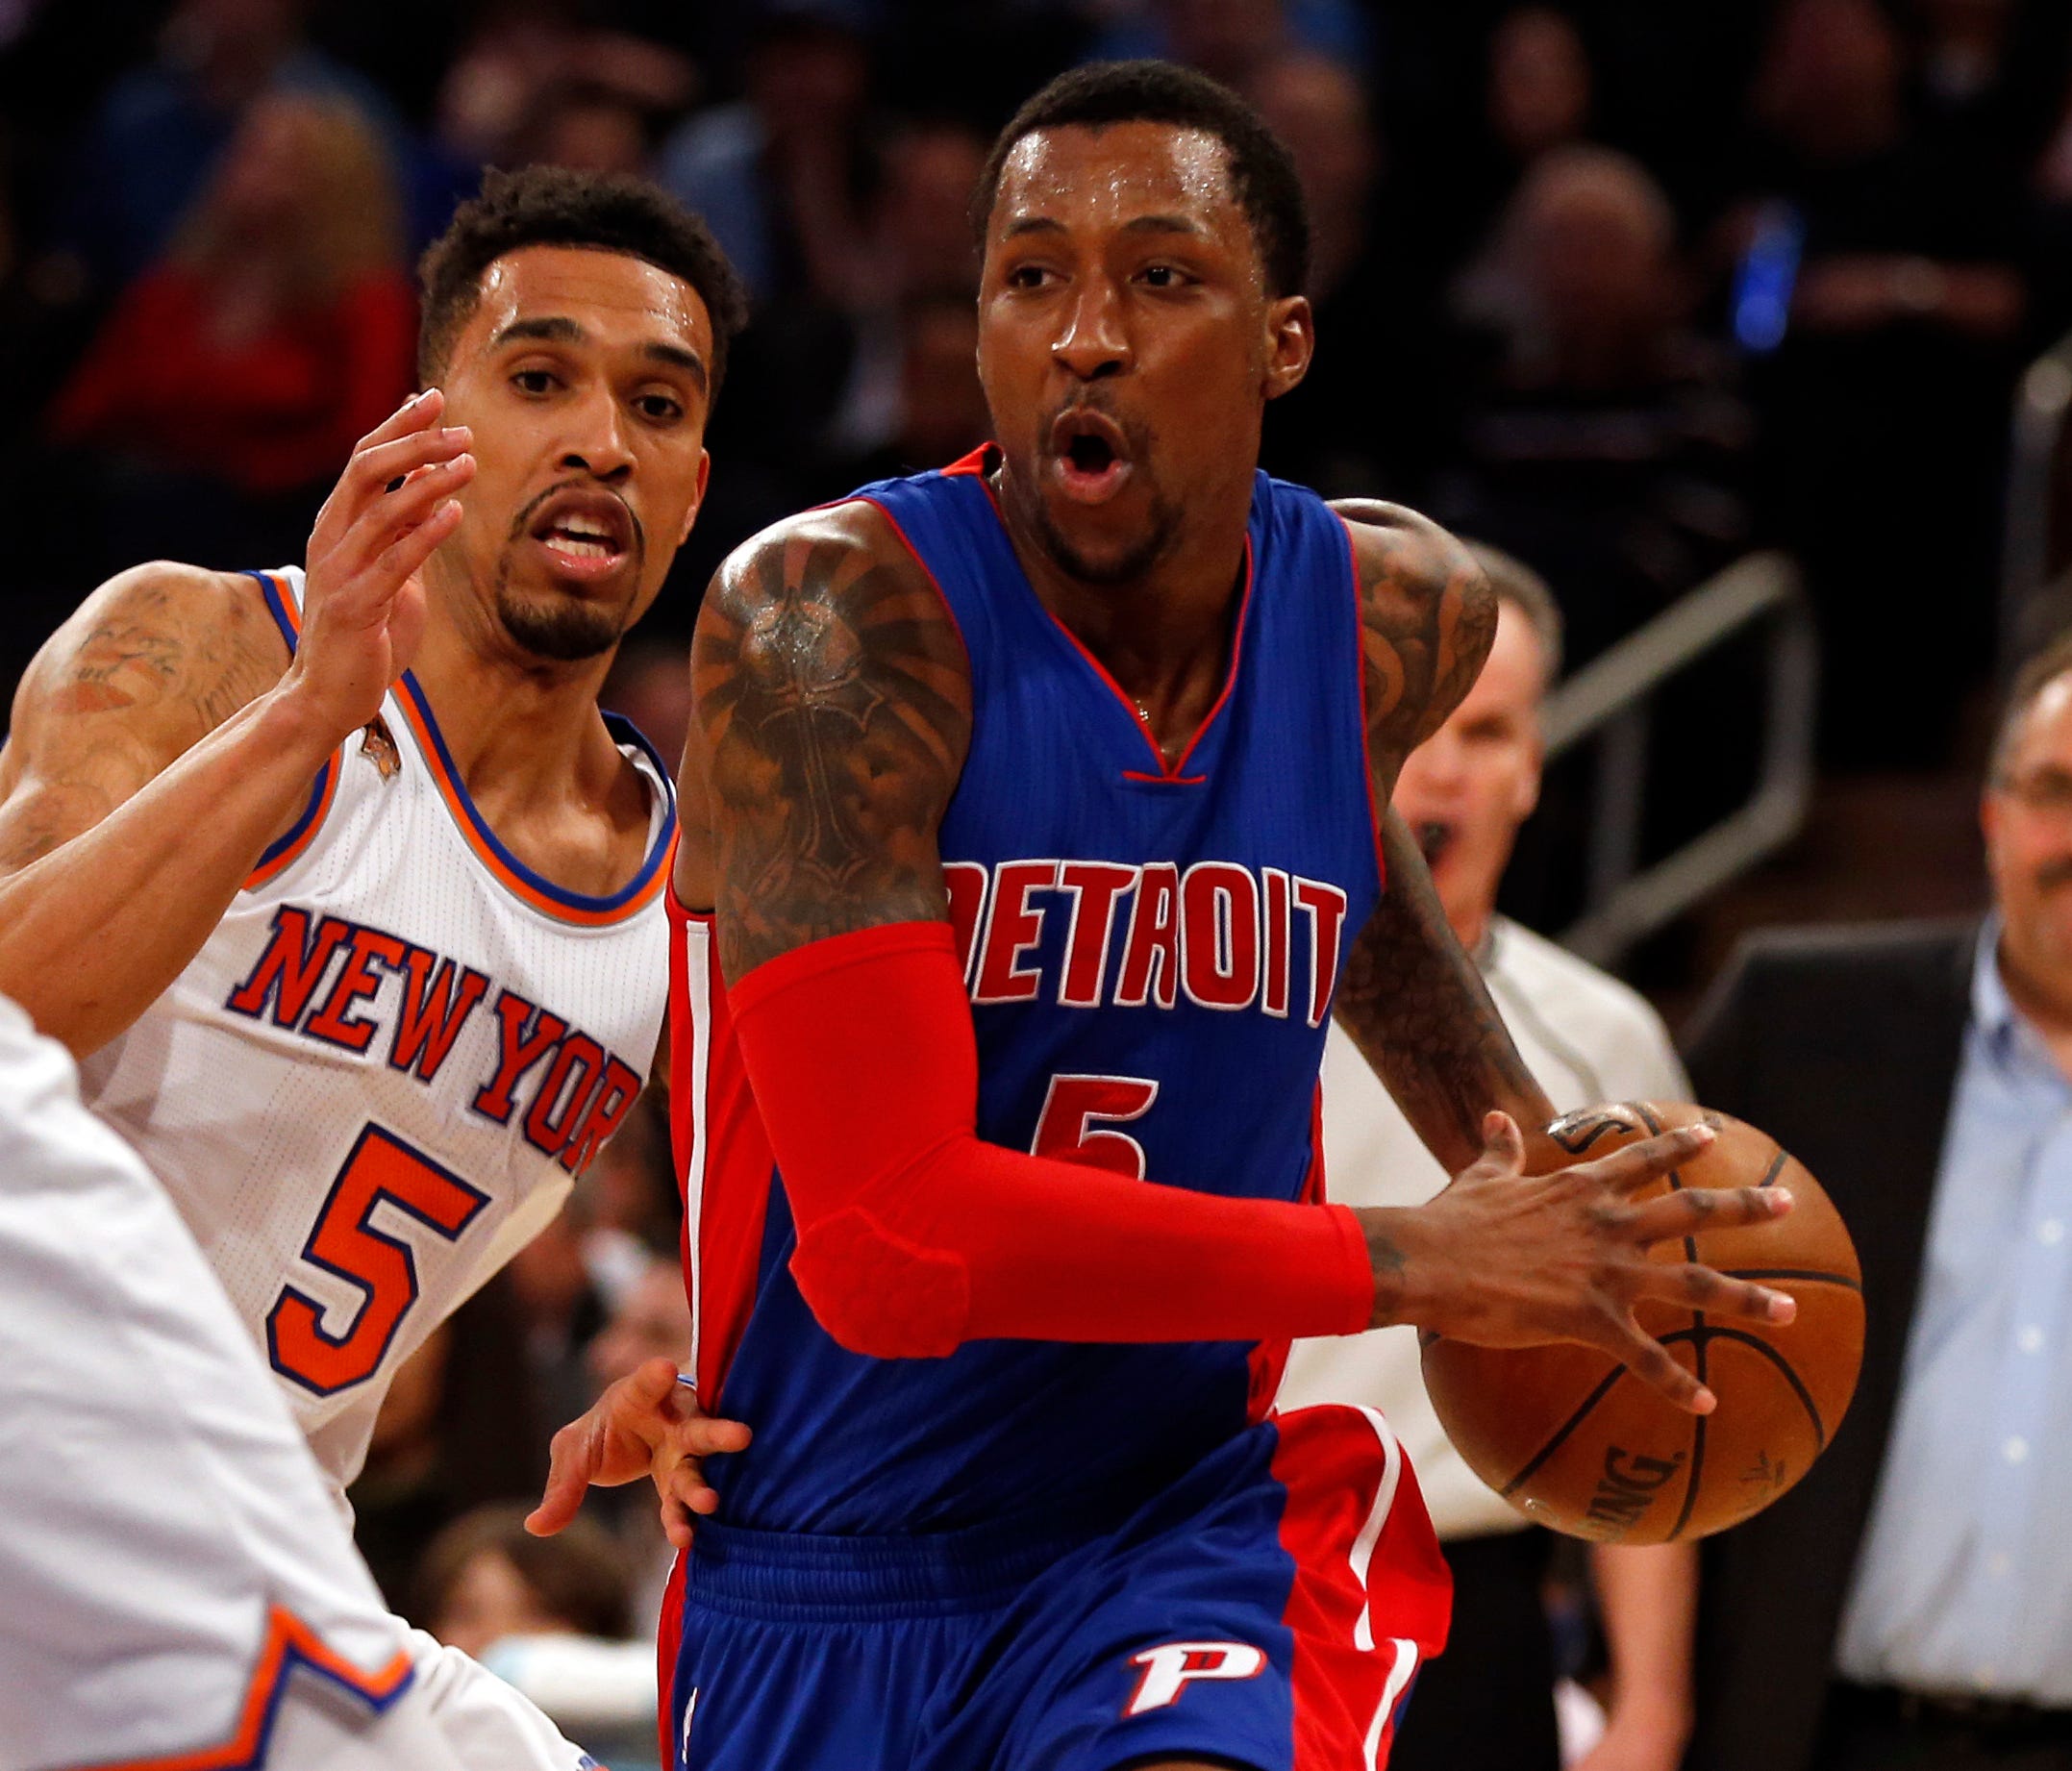 Detroit Pistons guard Kentavious Caldwell-Pope (5) drives to the basket past New York Knicks guard Courtney Lee (5) during the first quarter at Madison Square Garden.